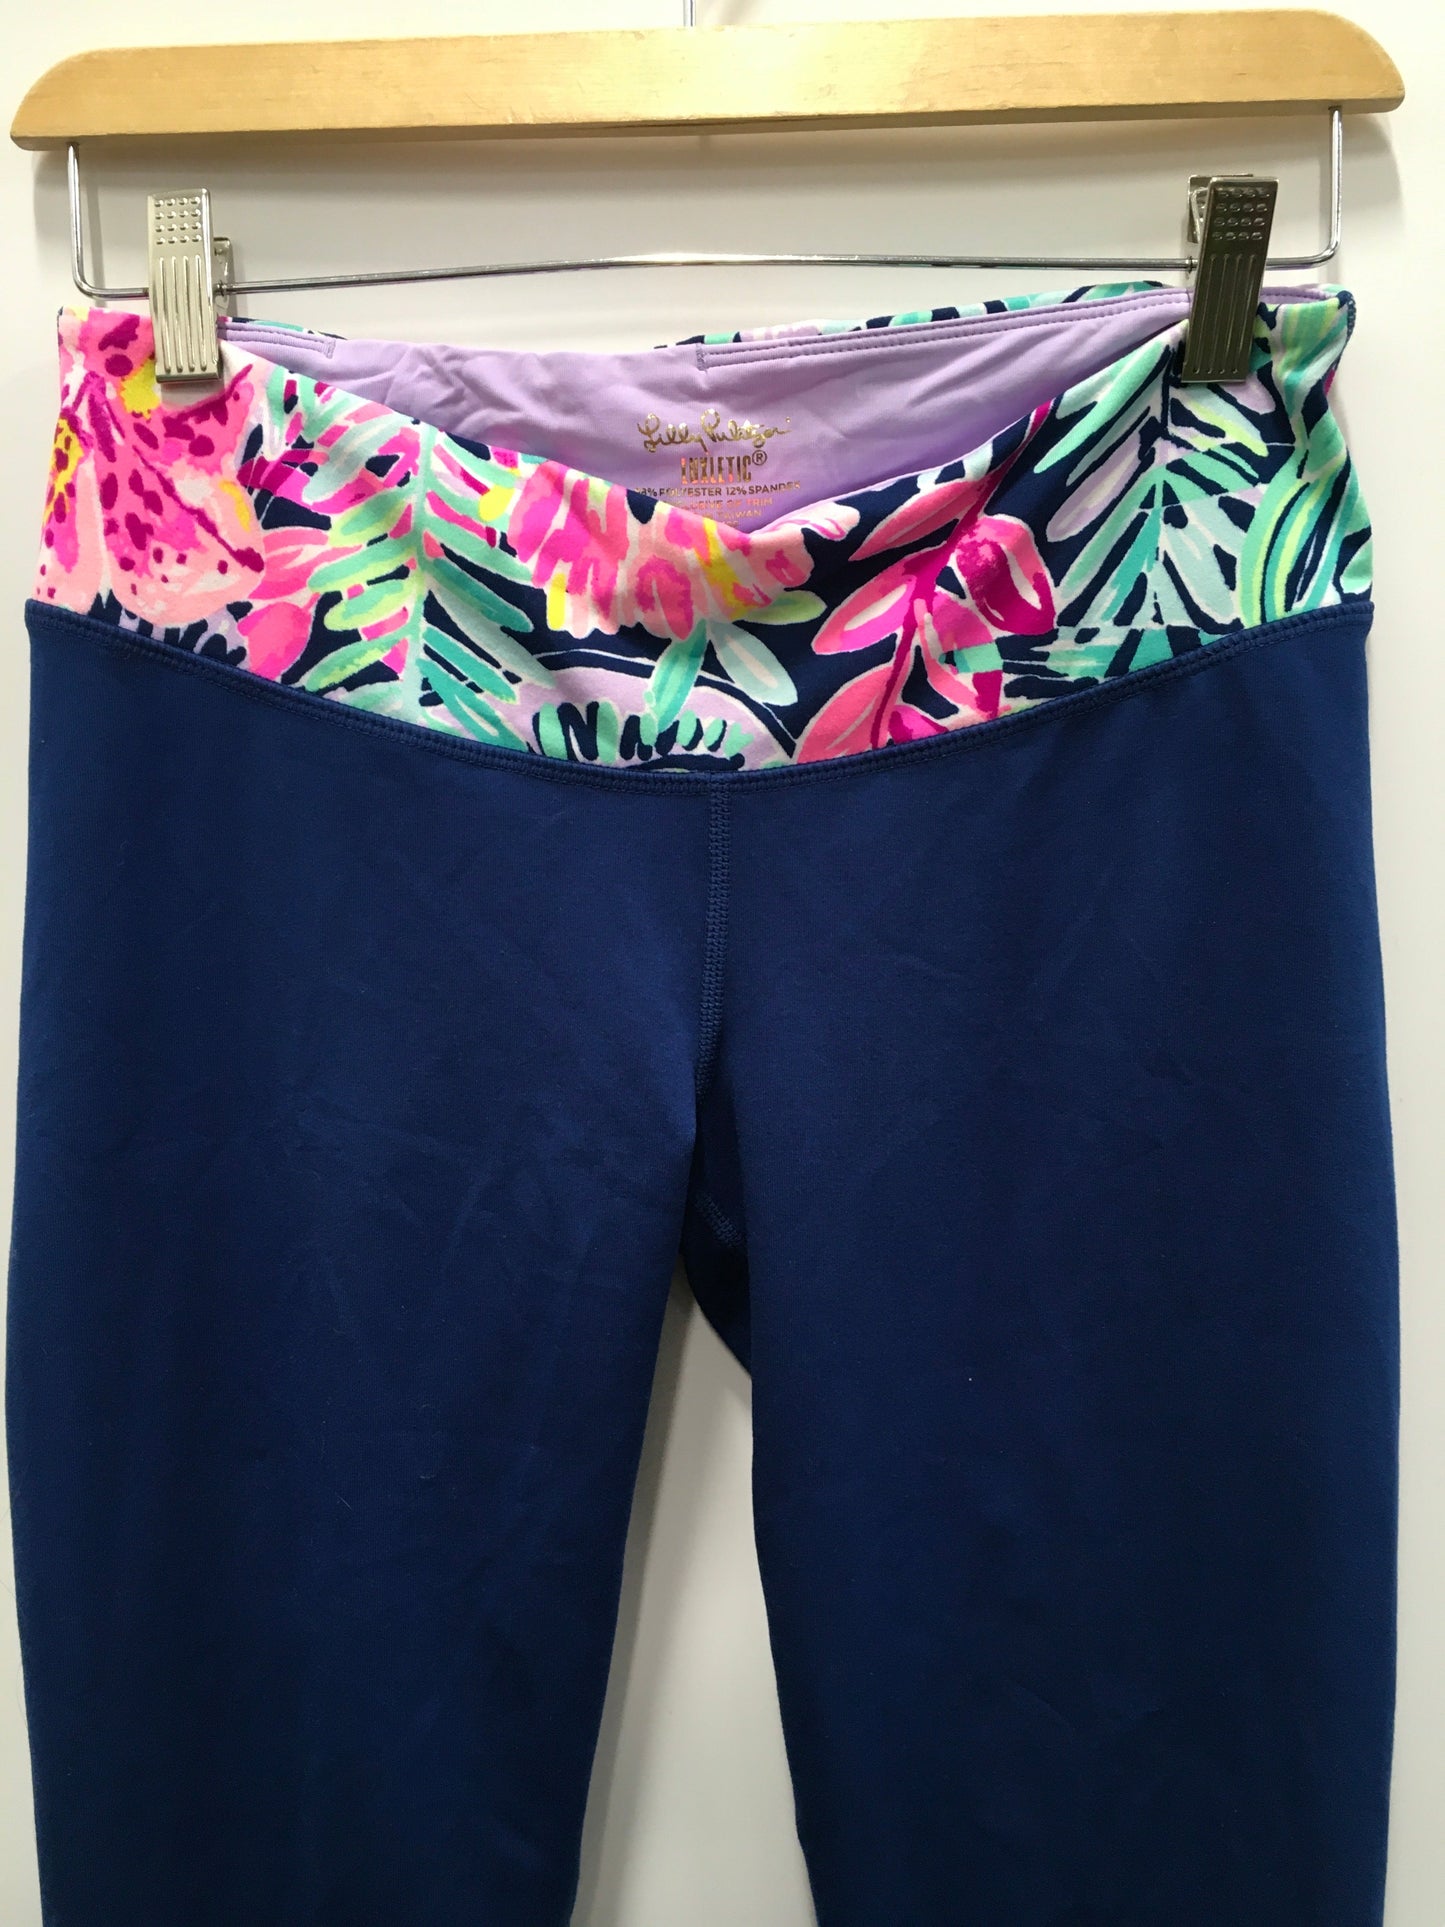 Athletic Leggings By Lilly Pulitzer  Size: M